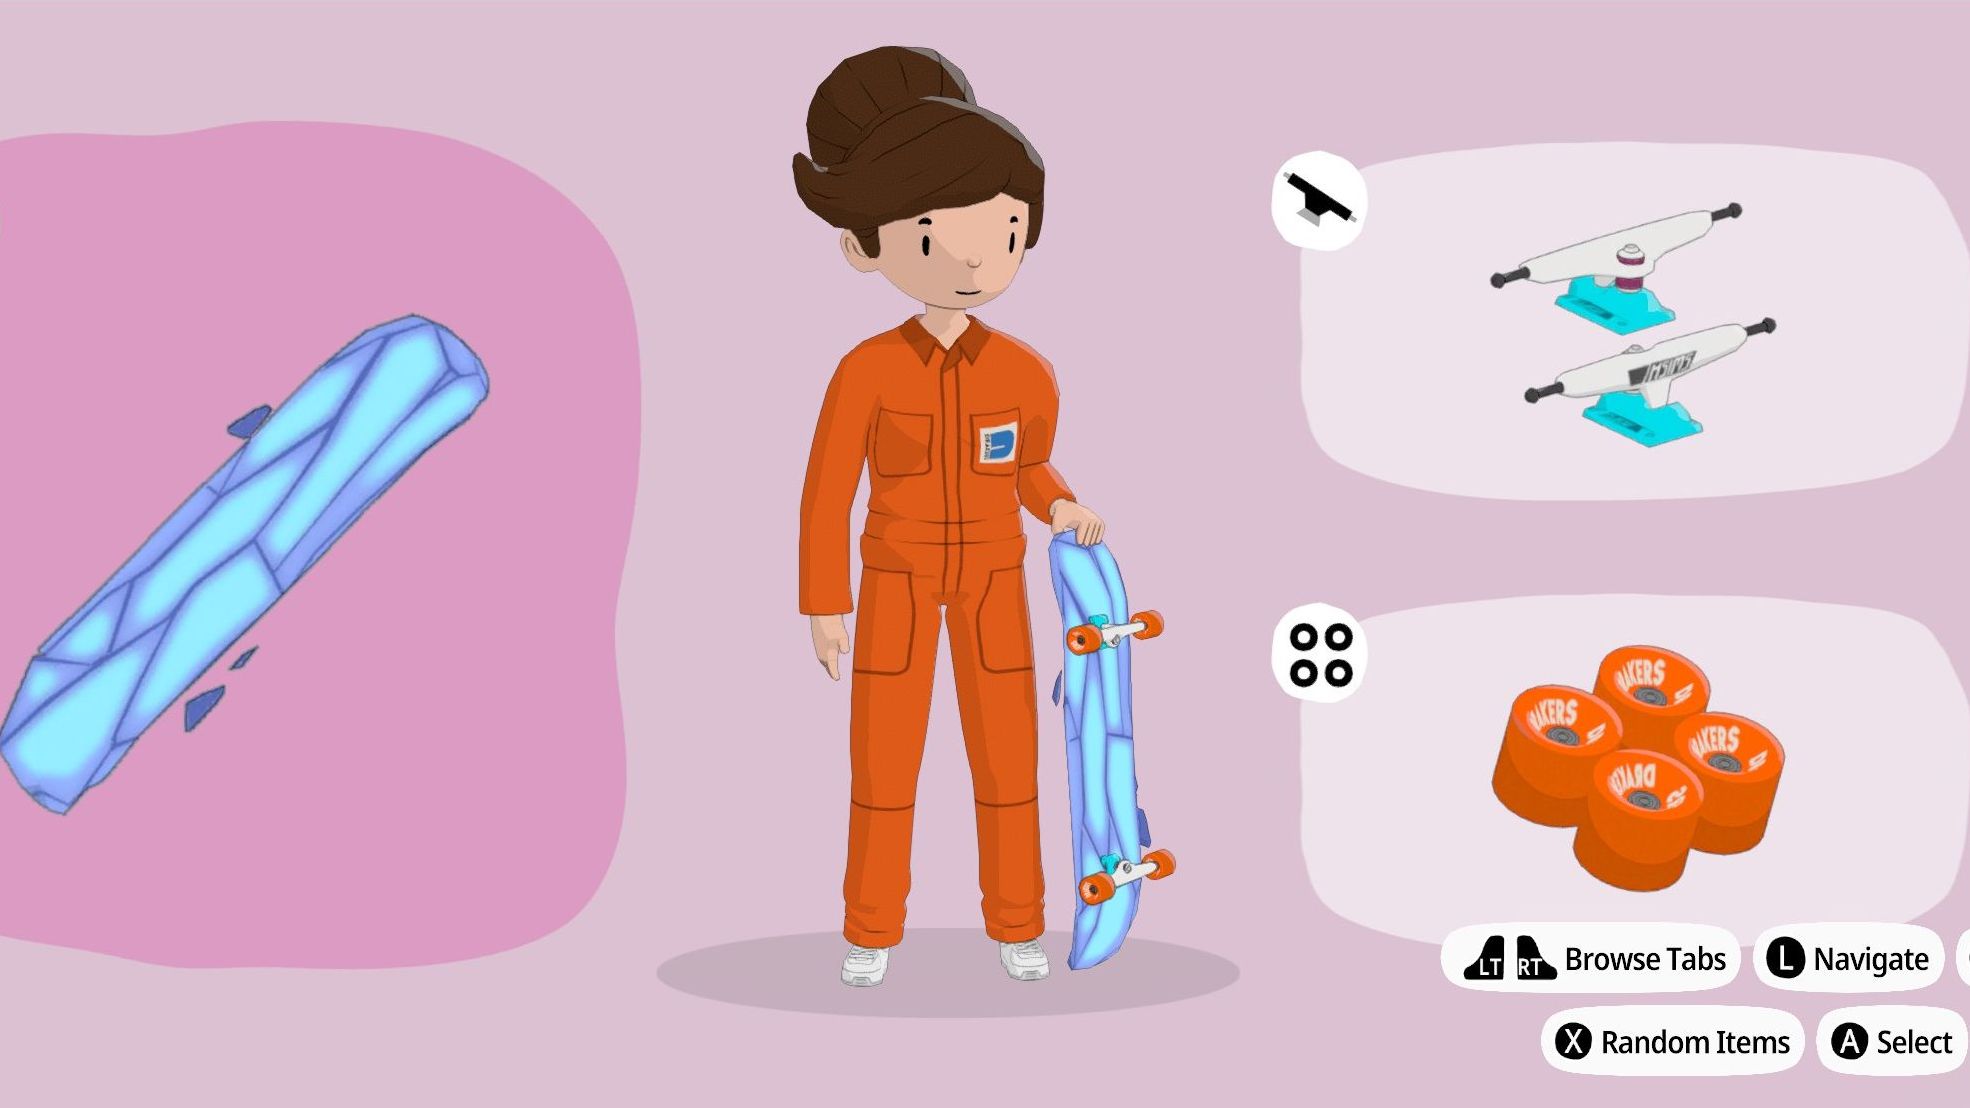 Chell from Portal as imagined in the OlliOlli World character customiser